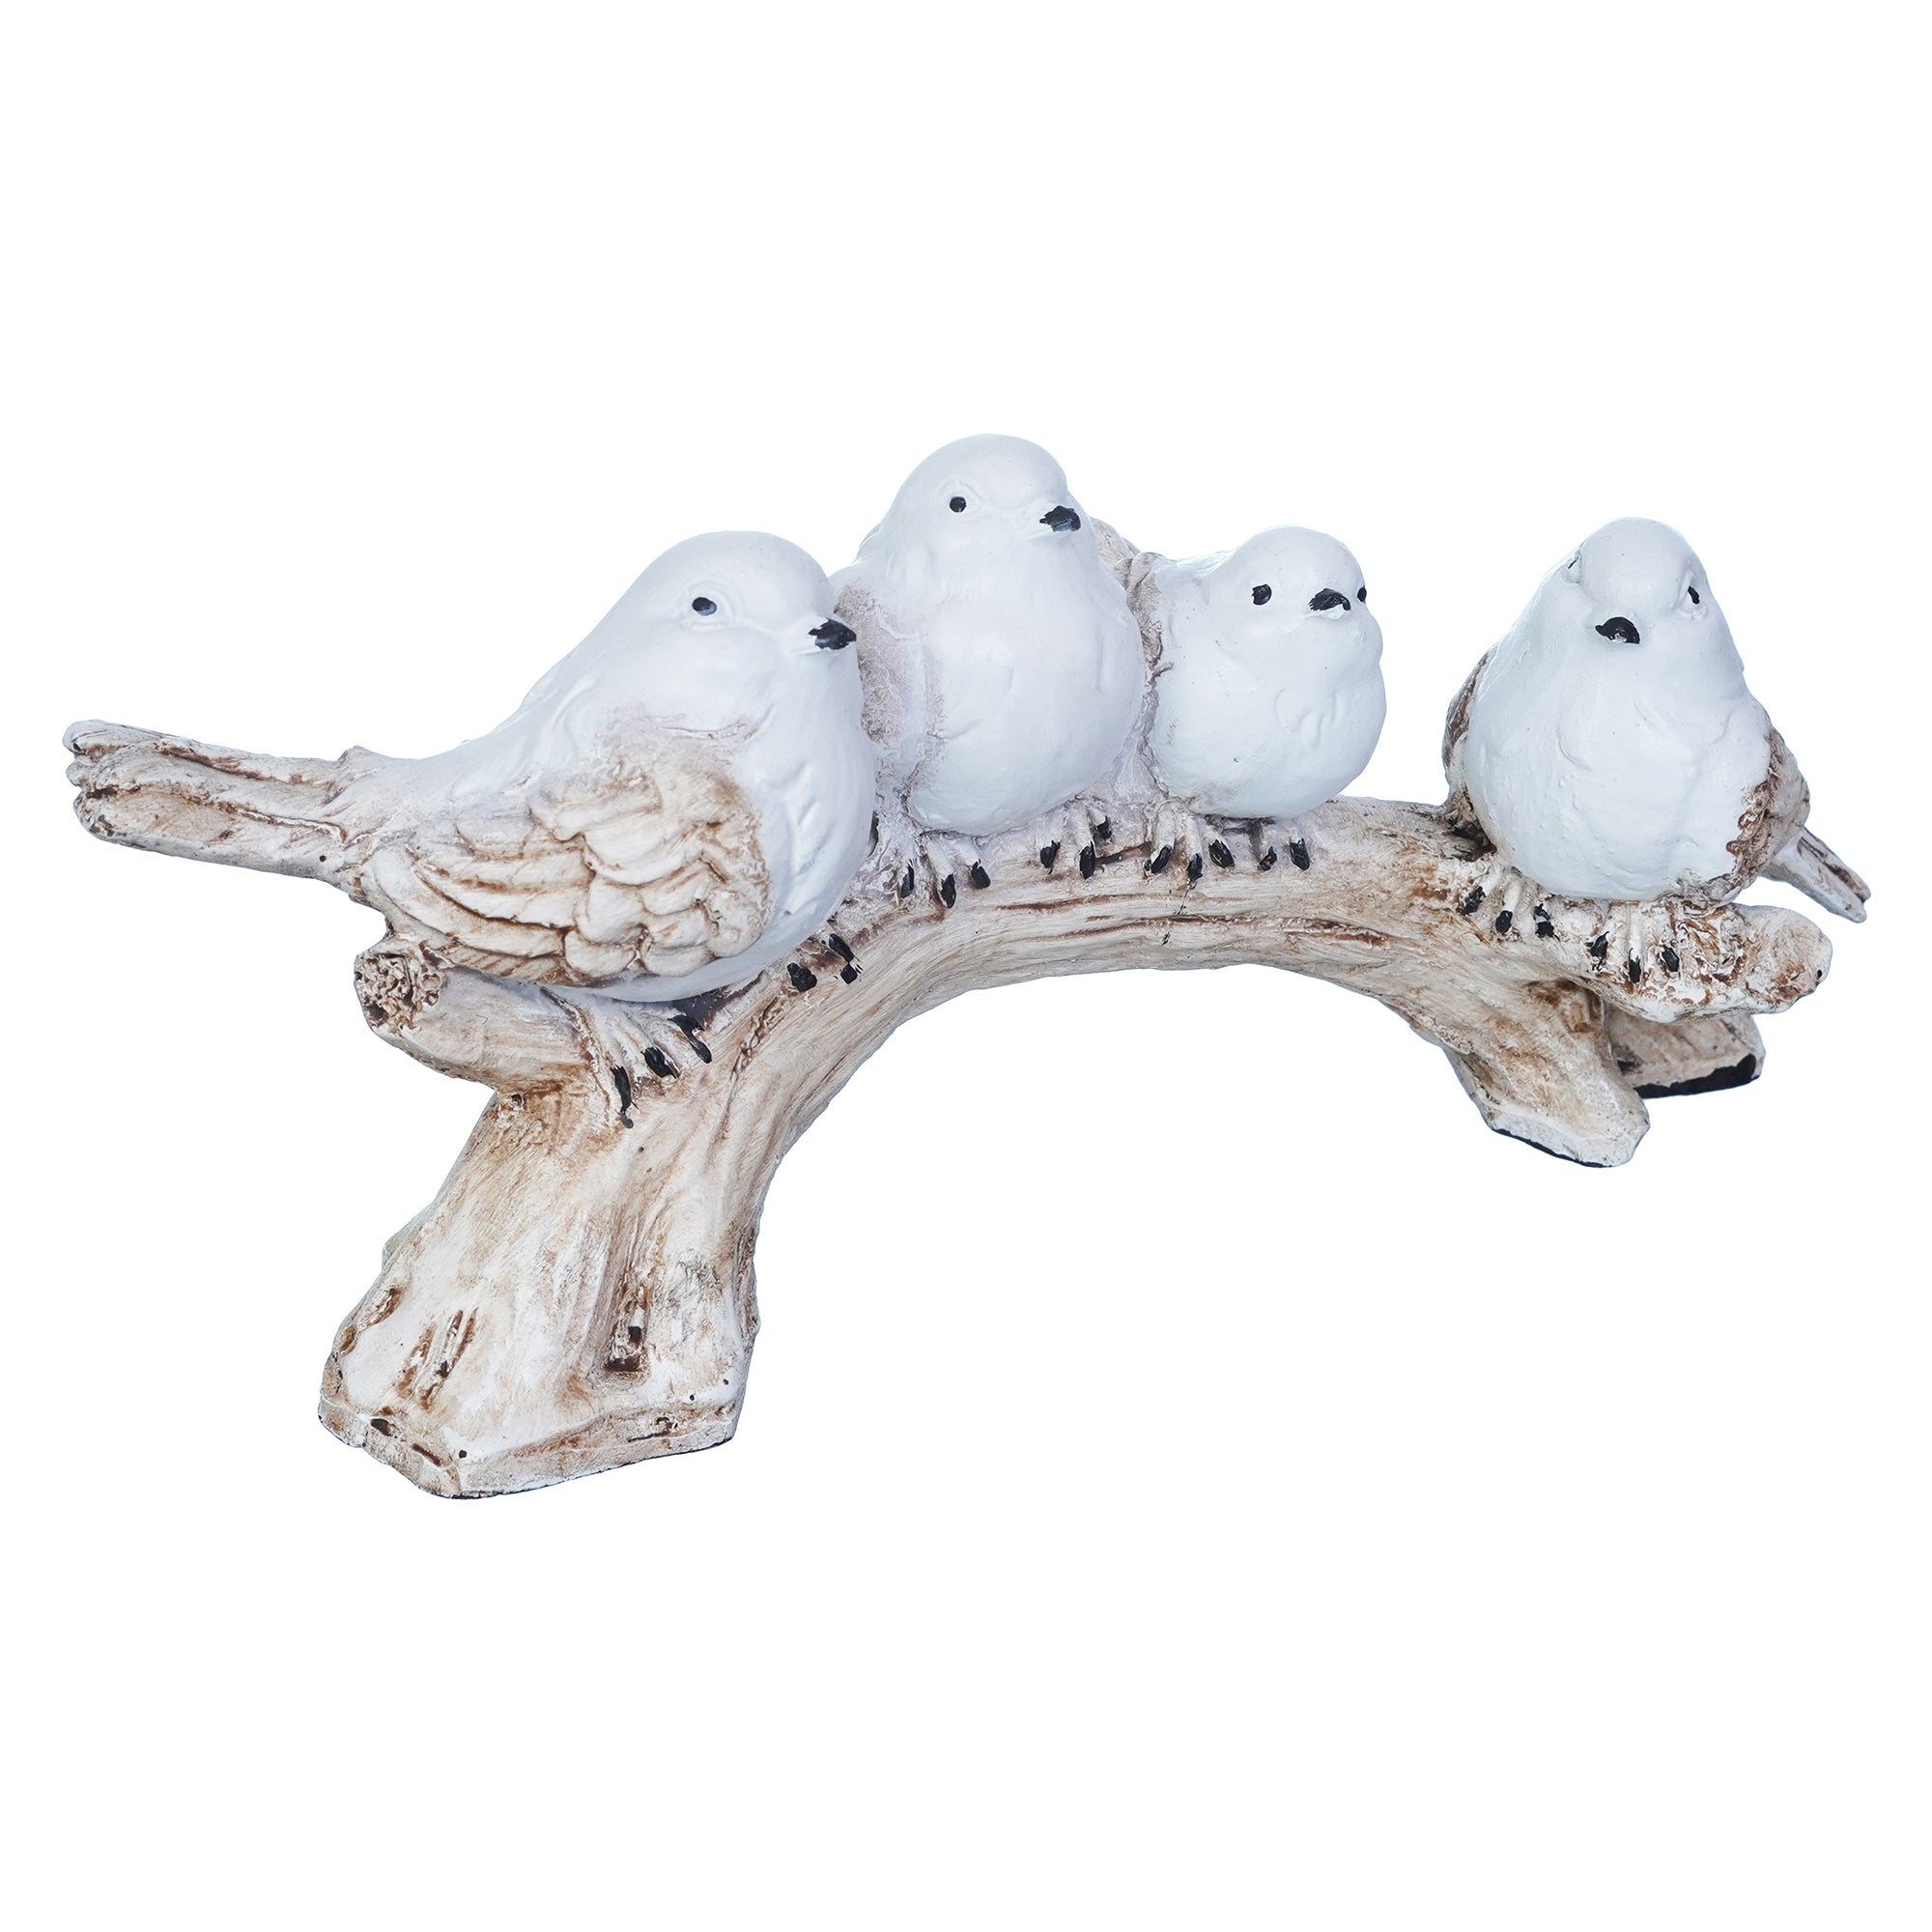 Polyresin Handcrafted 4 White Bird Statues Sitting on Tree Branch Decorative Showpiece 6